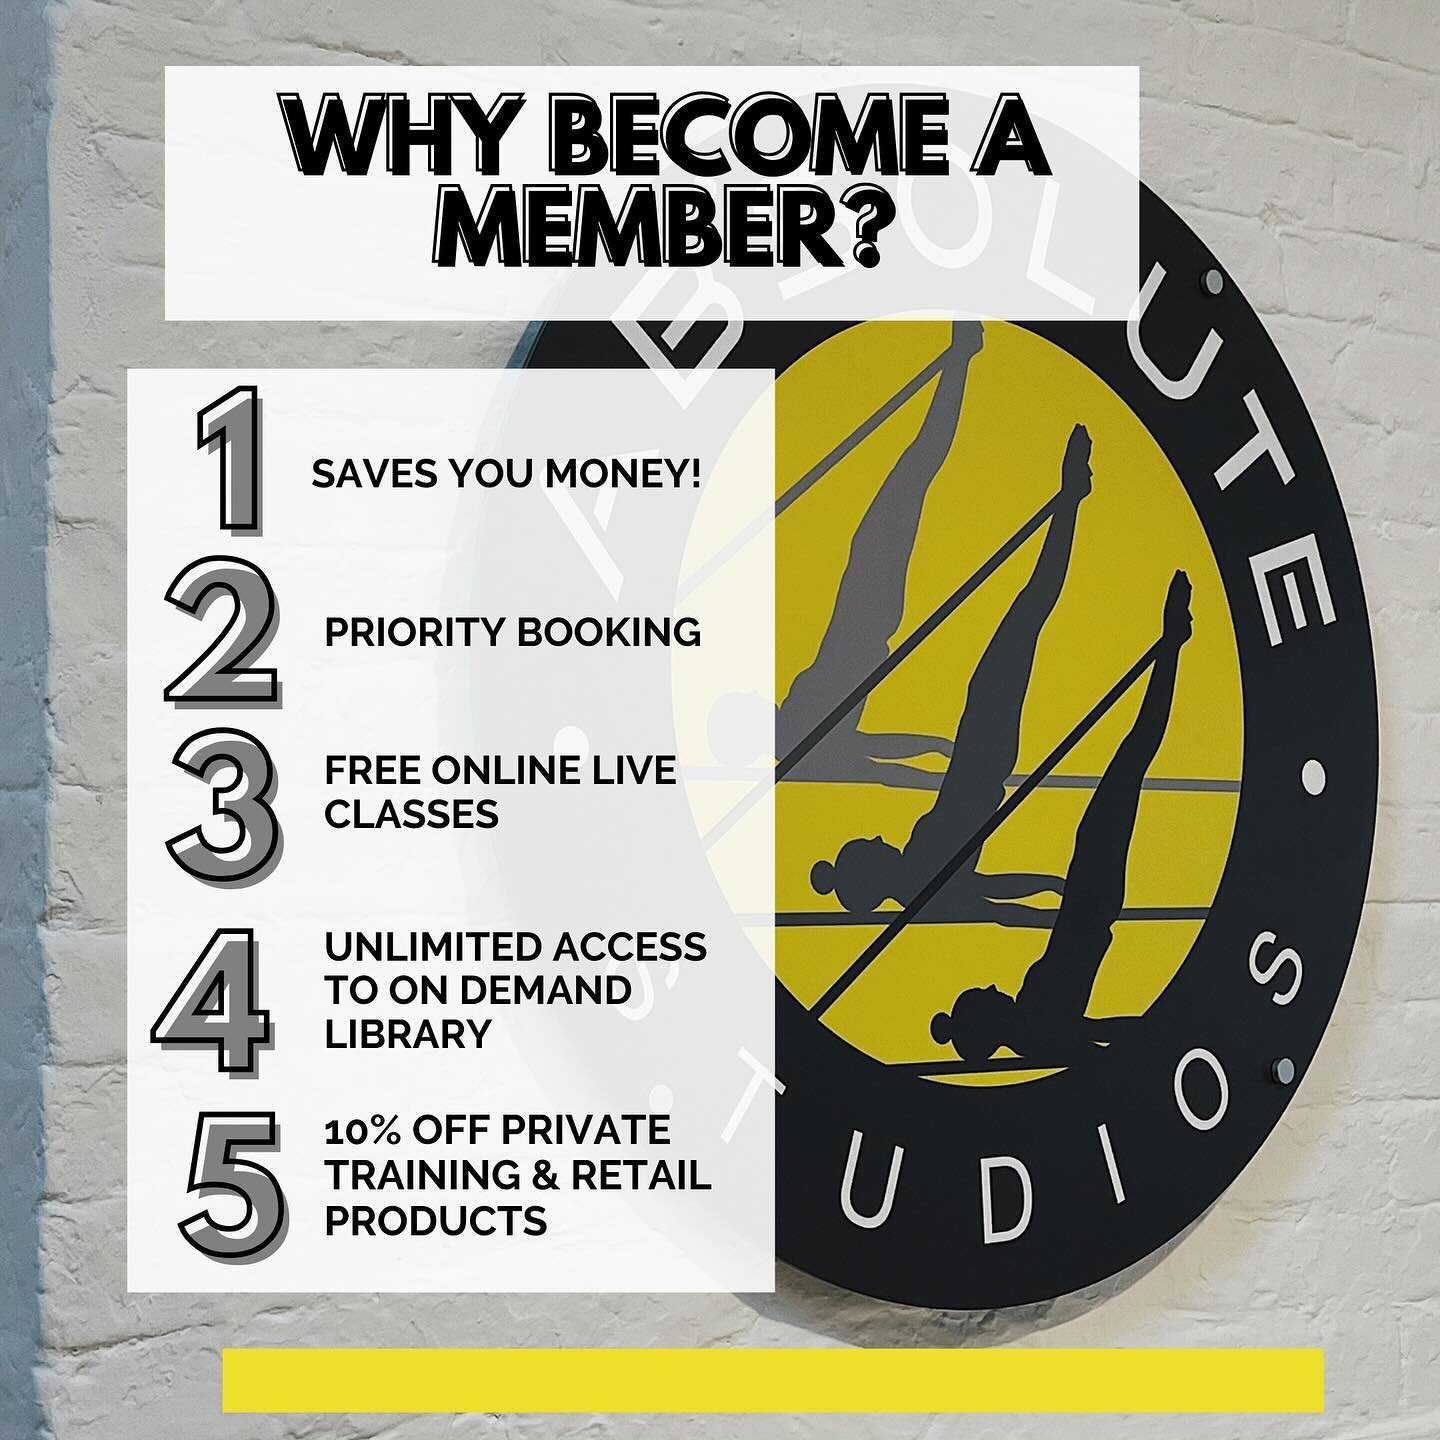 It&rsquo;s the BIG question isn&rsquo;t it? 

WHY, team Absolute, WHY should I become a member? 

Well, aside from Saving Money, Priority Access to classes, FREE online &amp; on demand classes and member only discounts, the answer is C. 

C for Consi